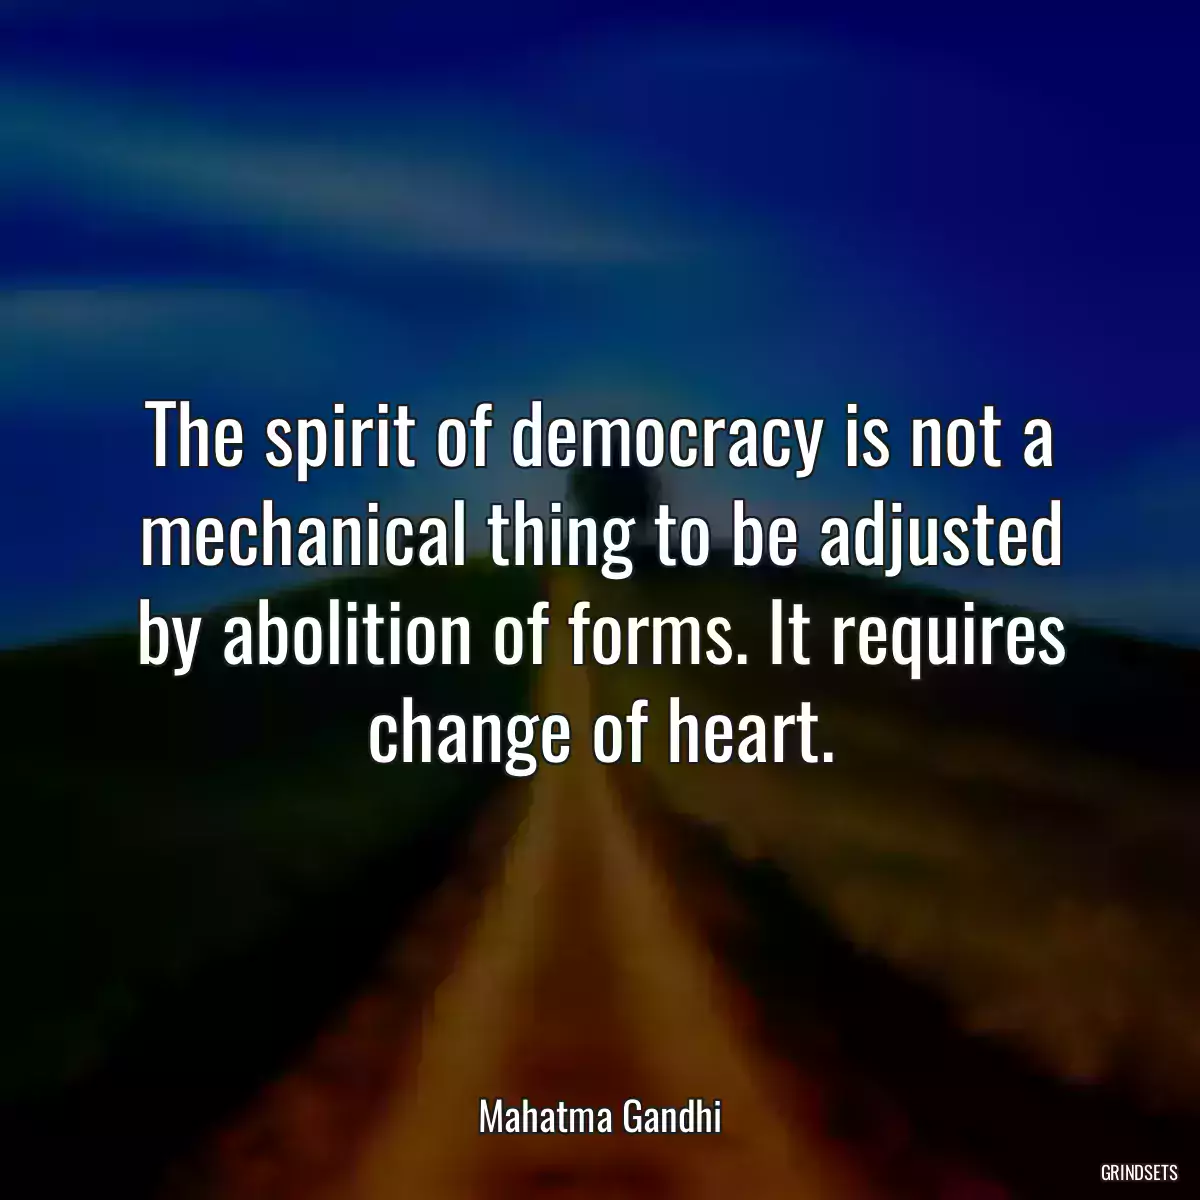 The spirit of democracy is not a mechanical thing to be adjusted by abolition of forms. It requires change of heart.